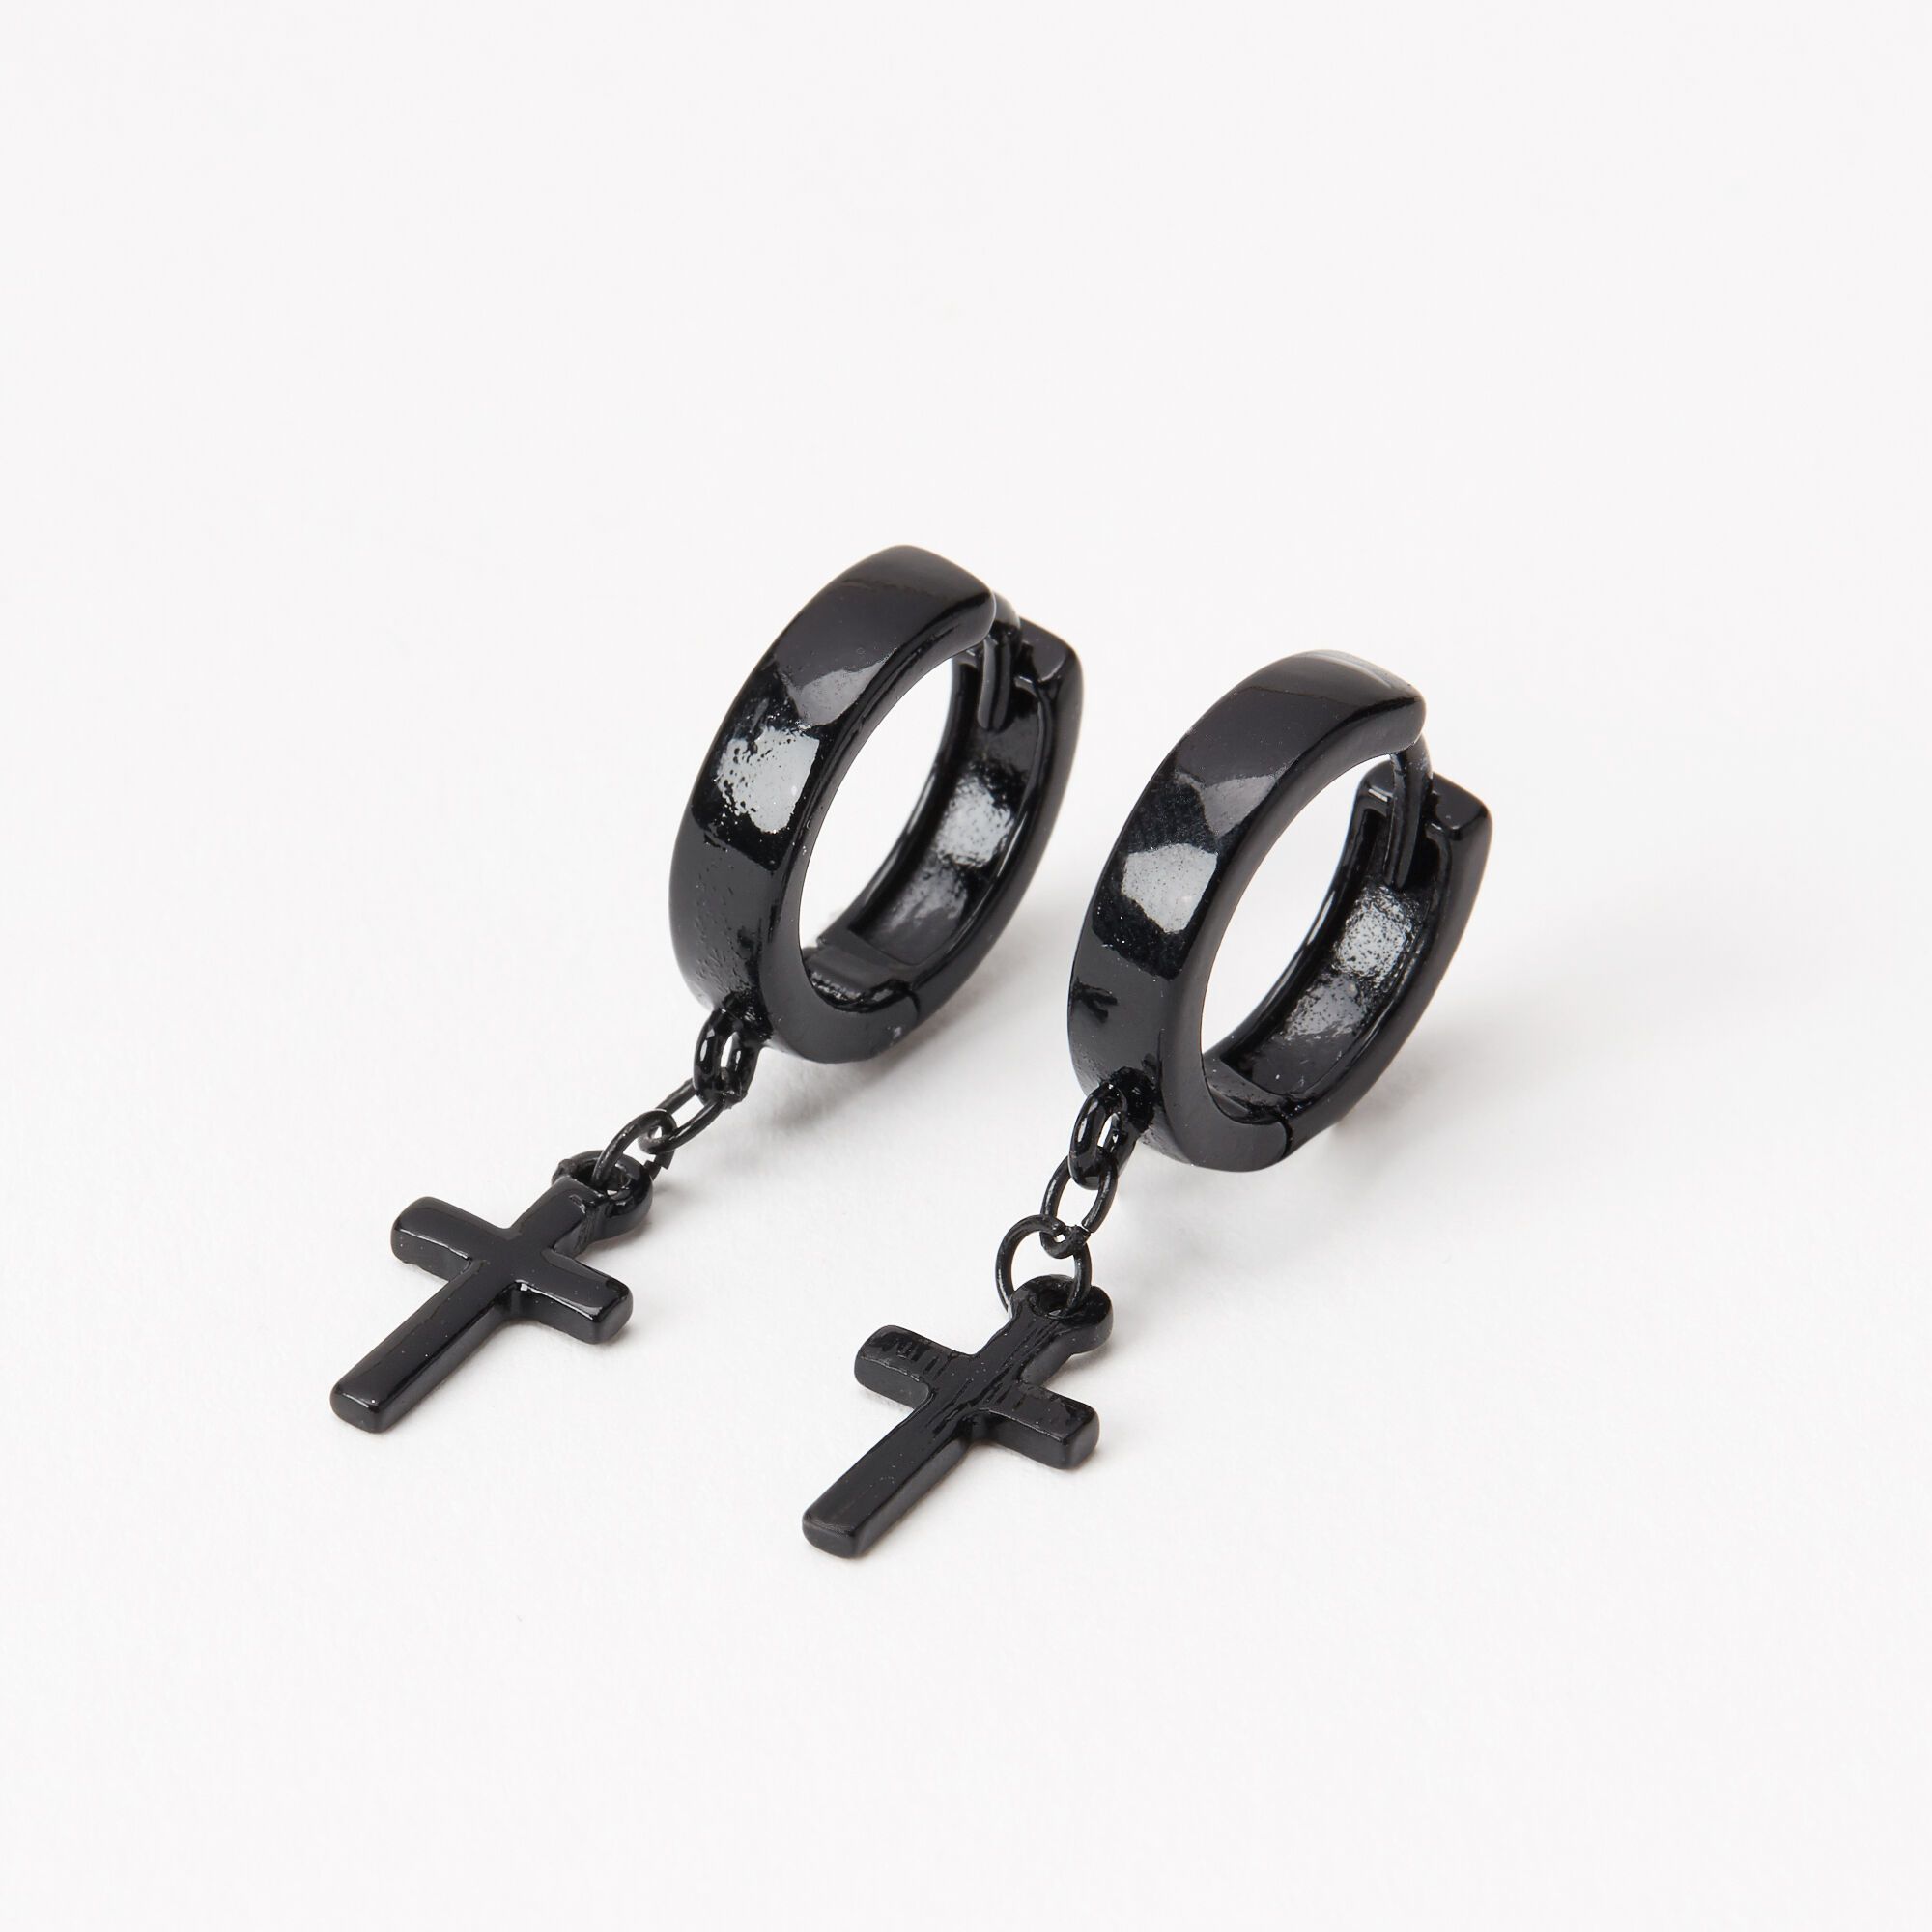 Add Black earrings to your fashion jewelry